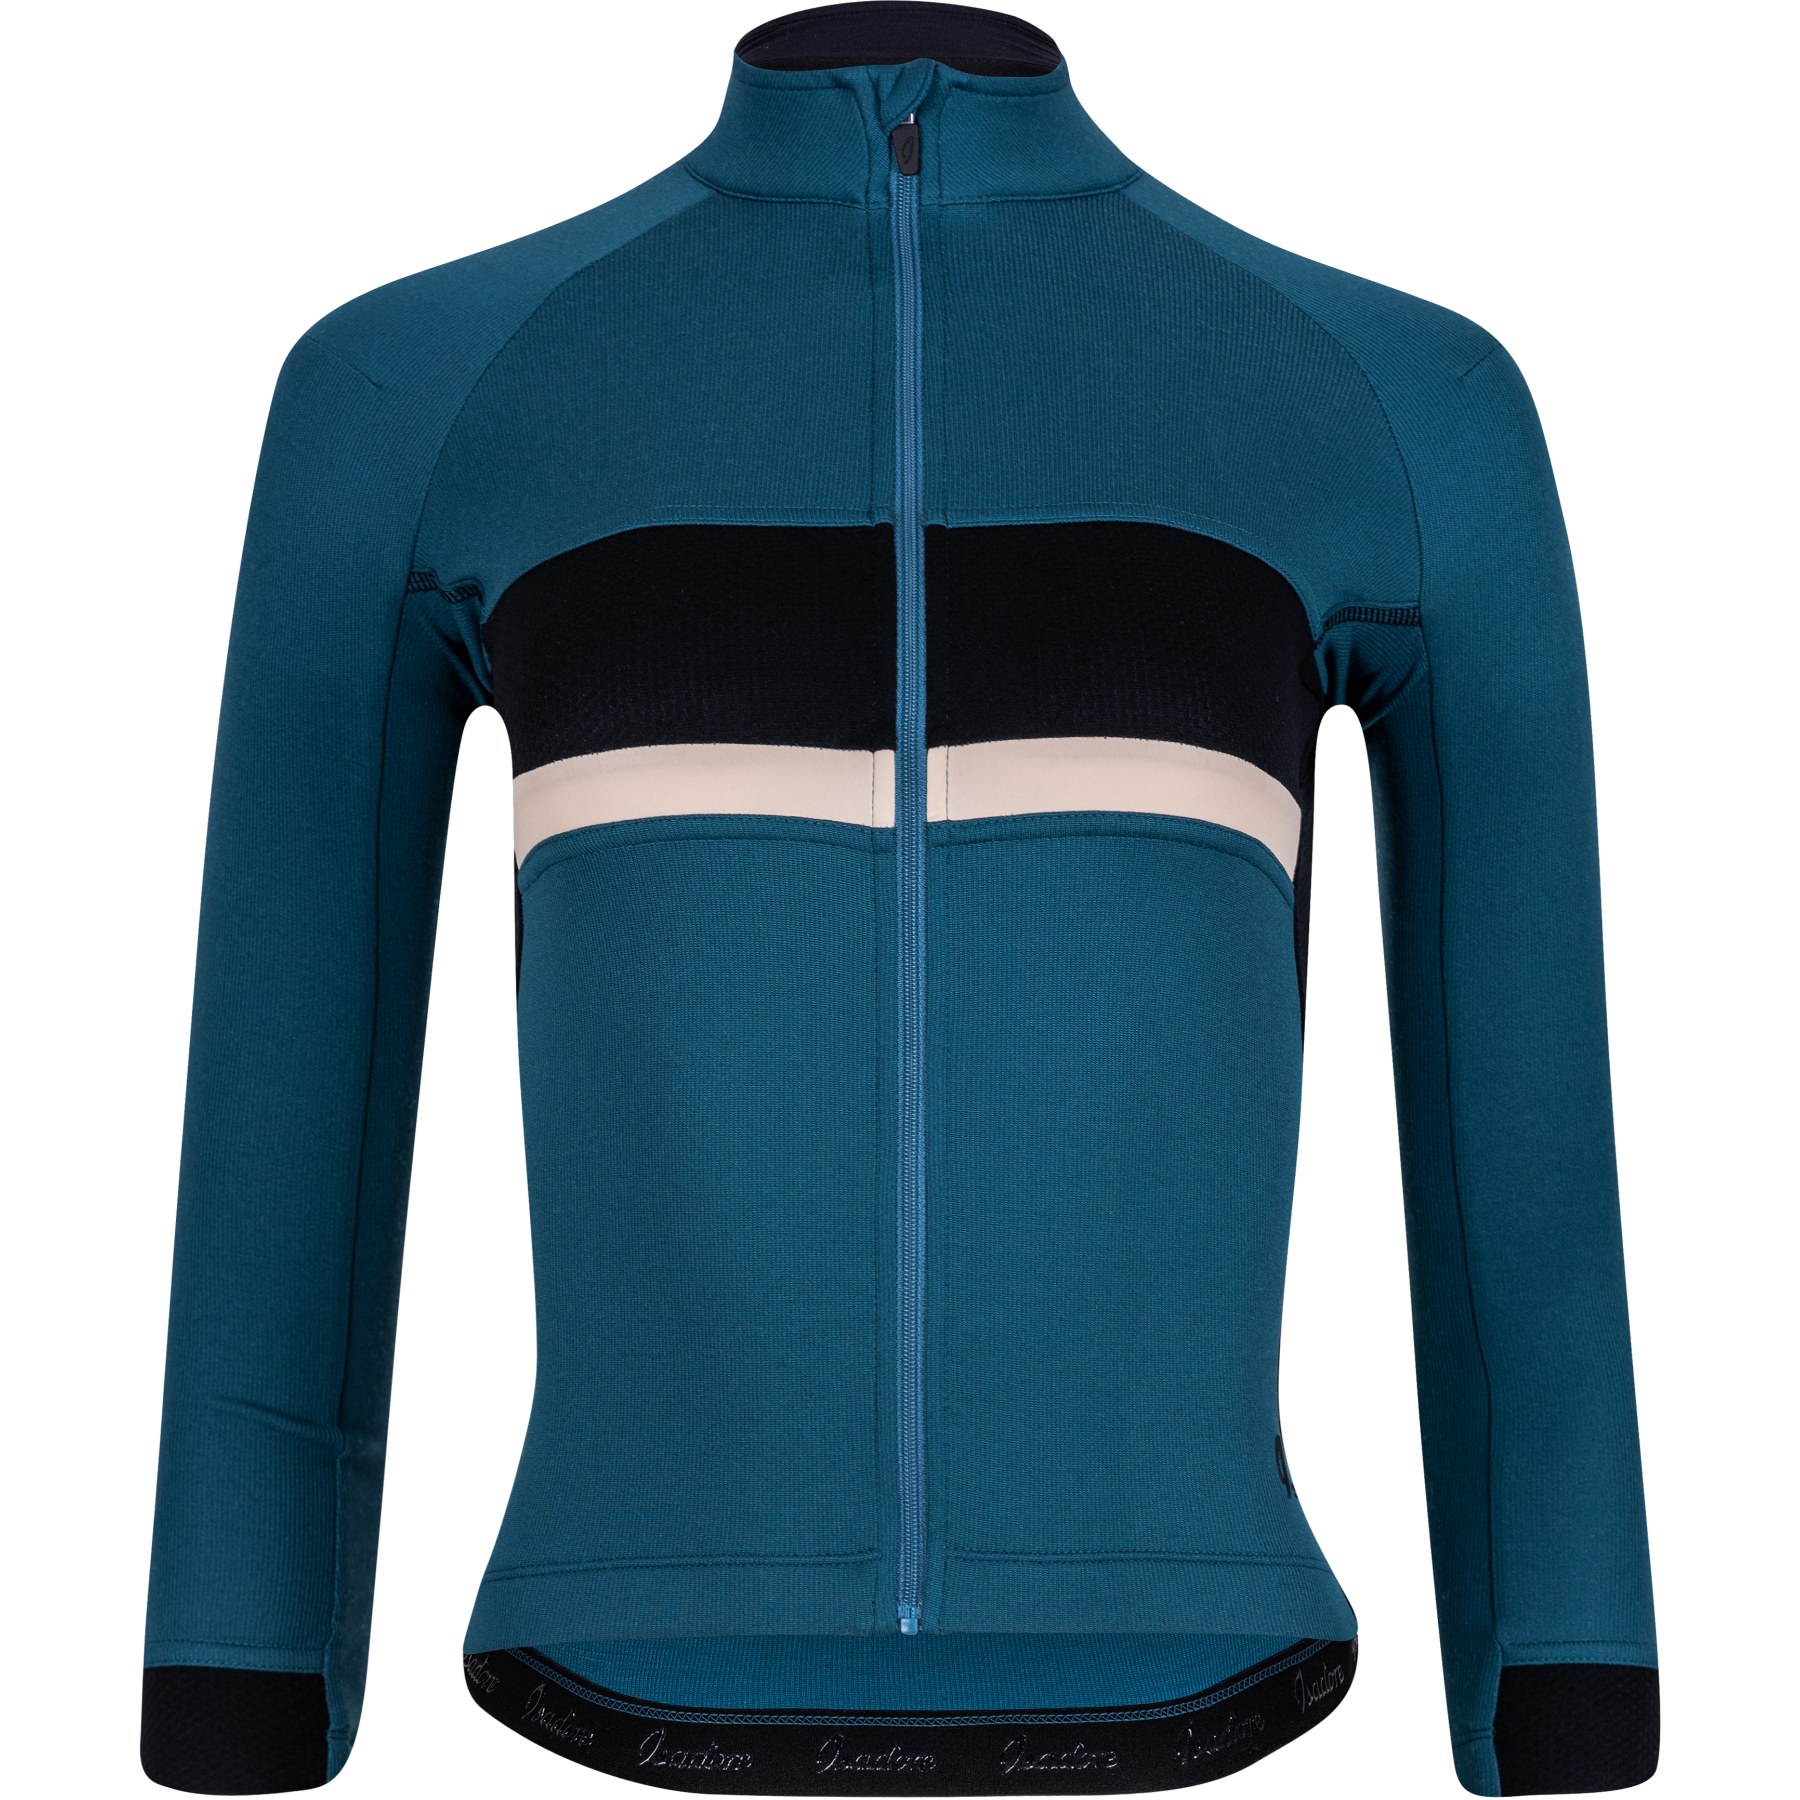 Image of Isadore Gravel Women's 3/4 Sleeve Jersey - Blue Coral